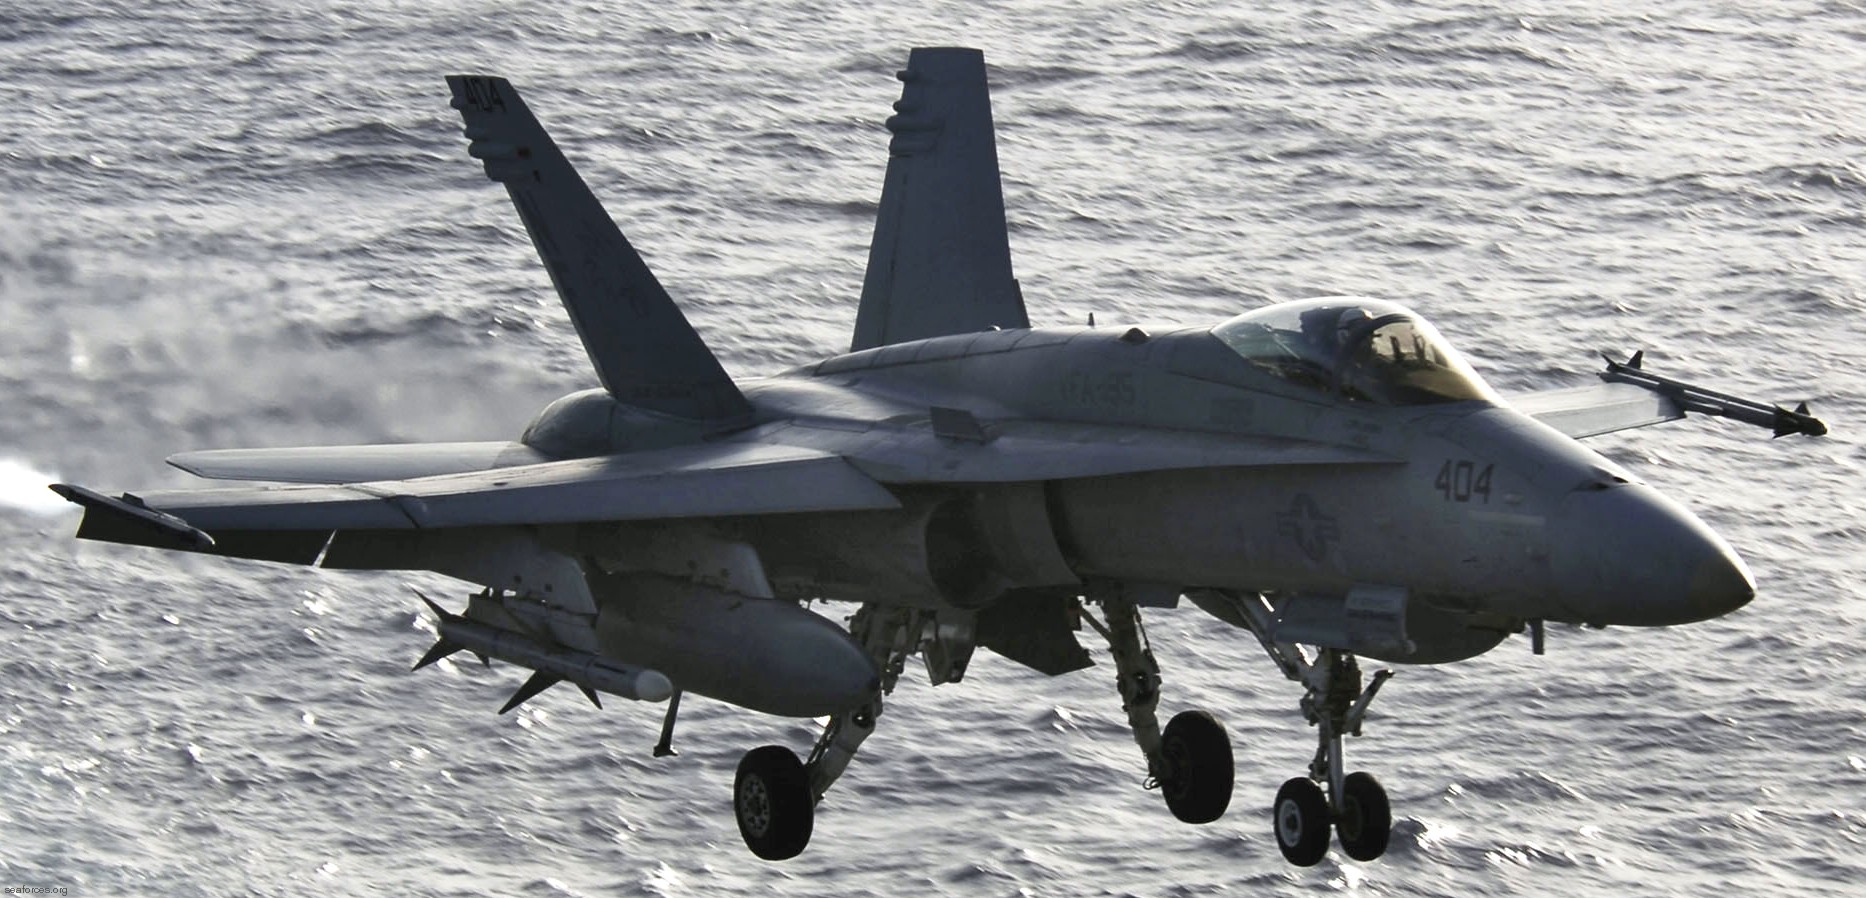 vfa-195 dambusters strike fighter squadron navy f/a-18c hornet carrier air wing cvw-5 uss kitty hawk cv-63 61